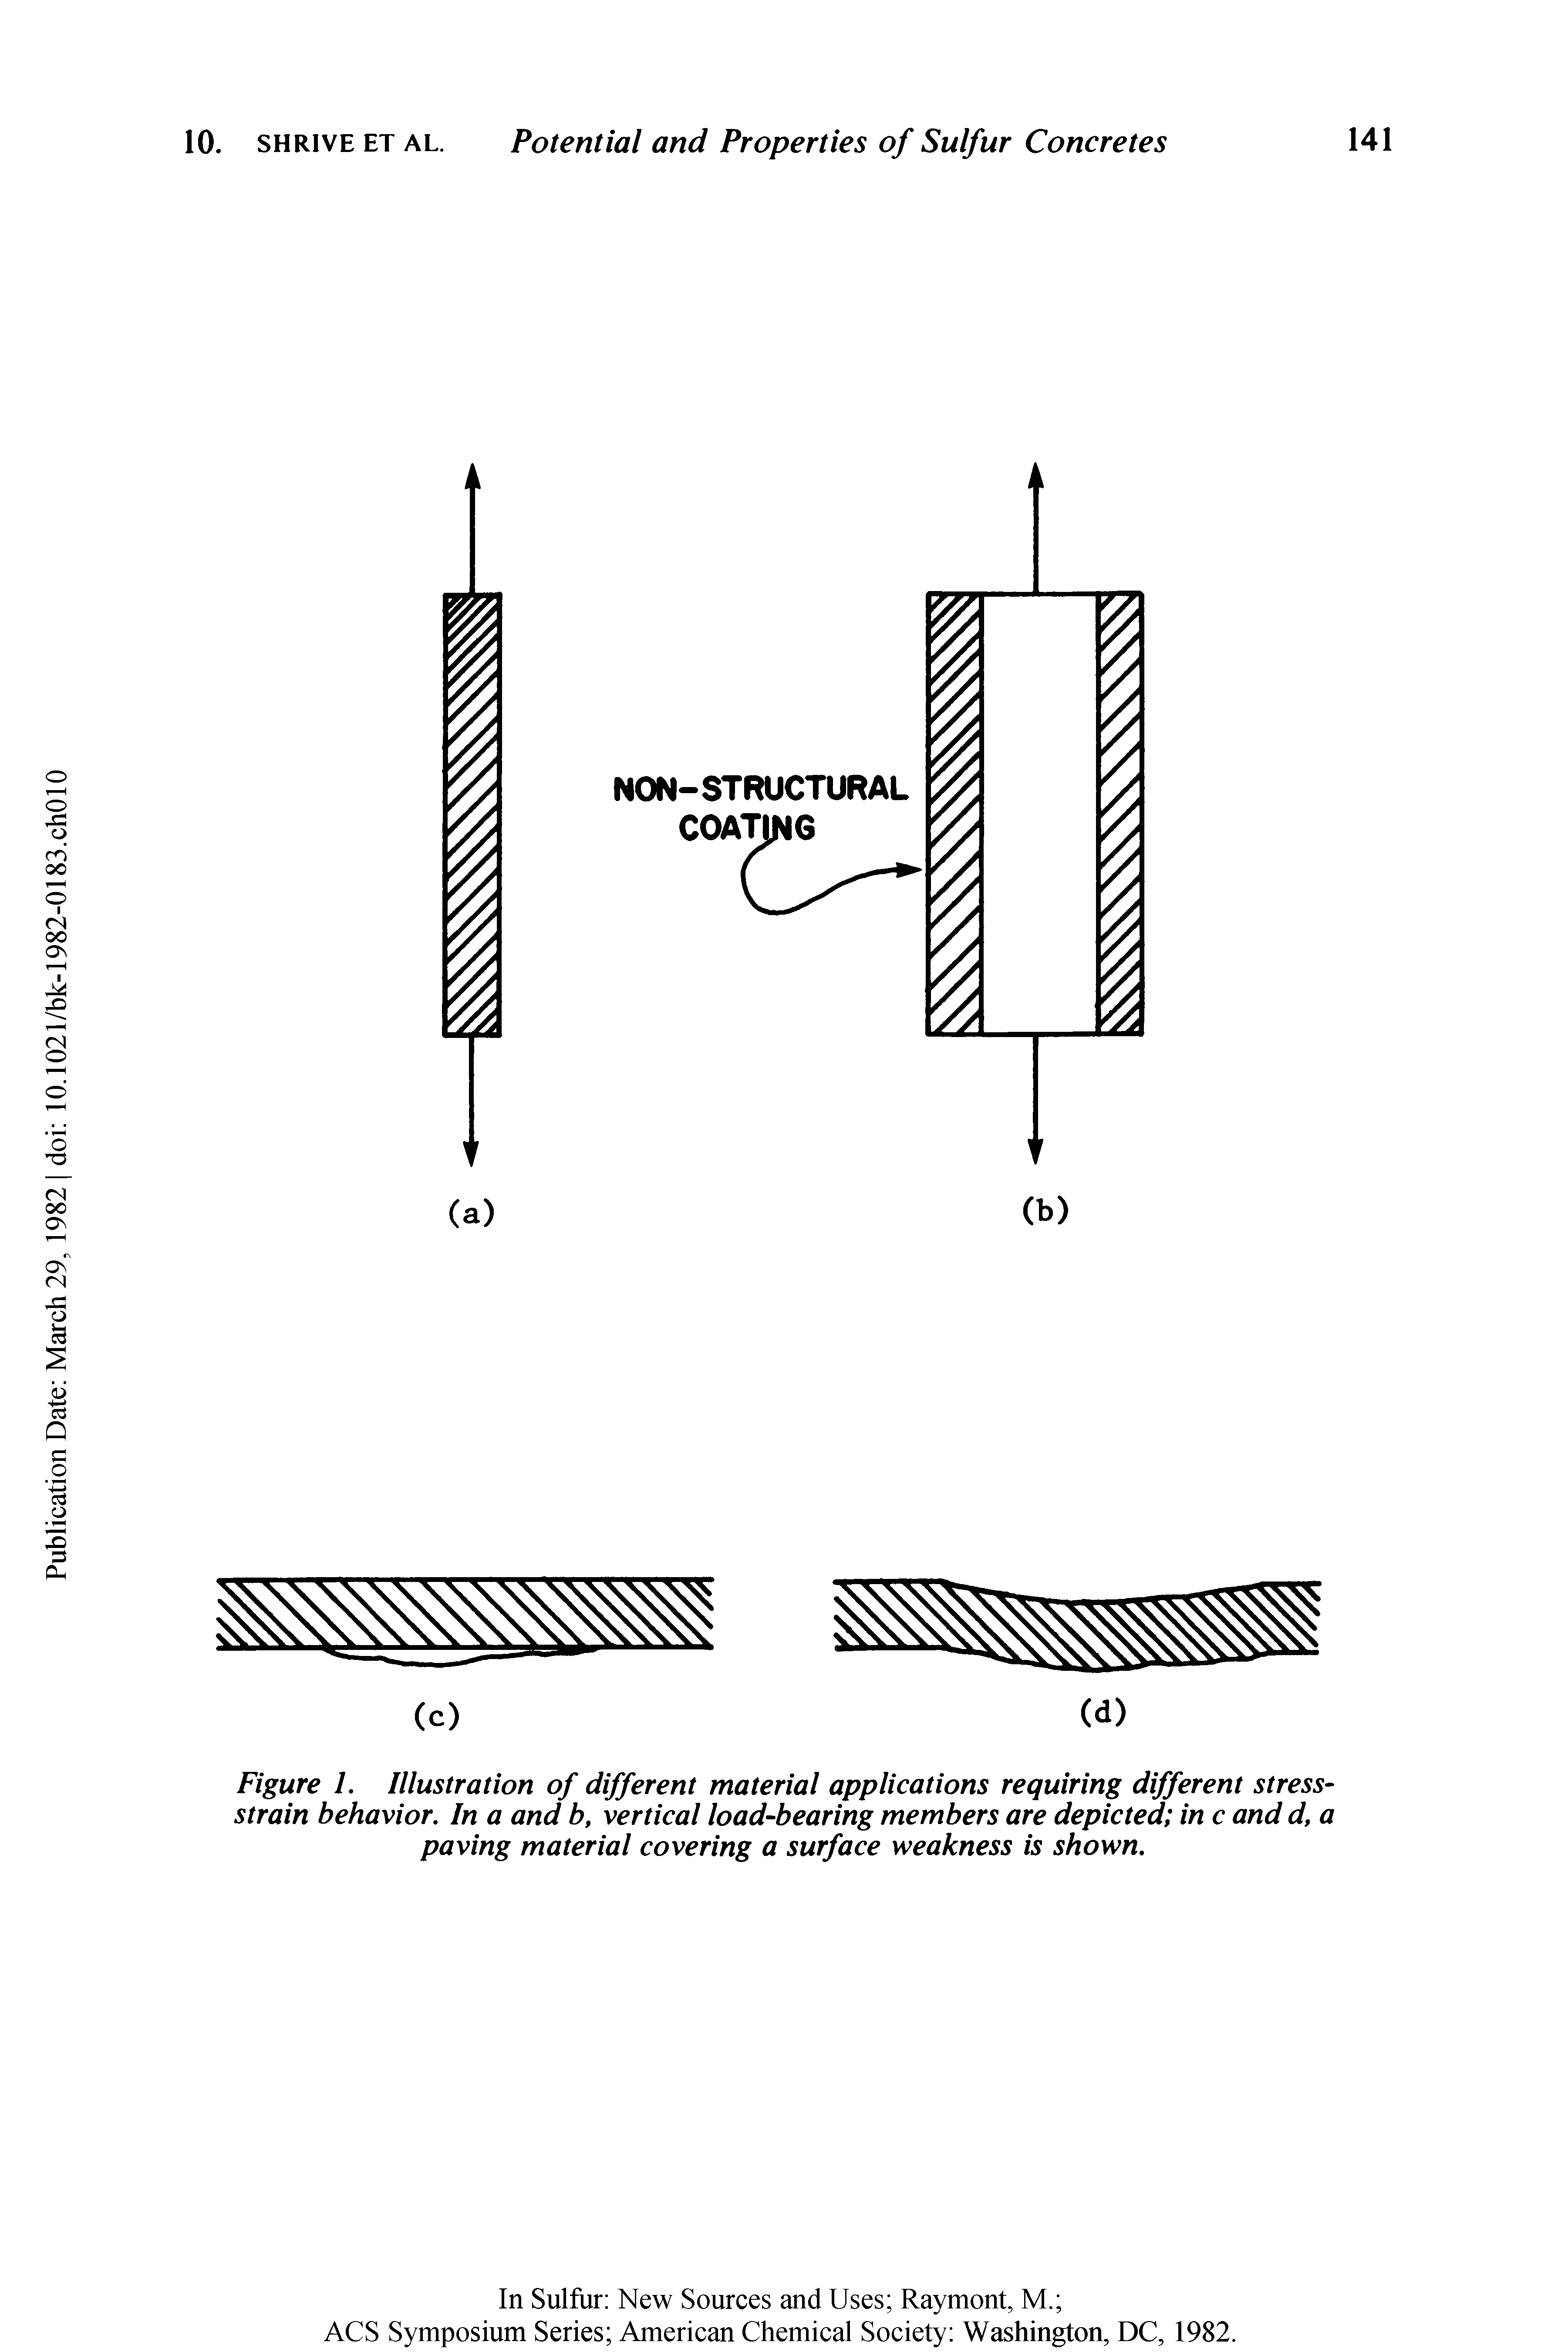 Figure 1. Illustration of different material applications requiring different stress-strain behavior. In a and b, vertical load-bearing members are depicted in c and d, a paving material covering a surface weakness is shown.